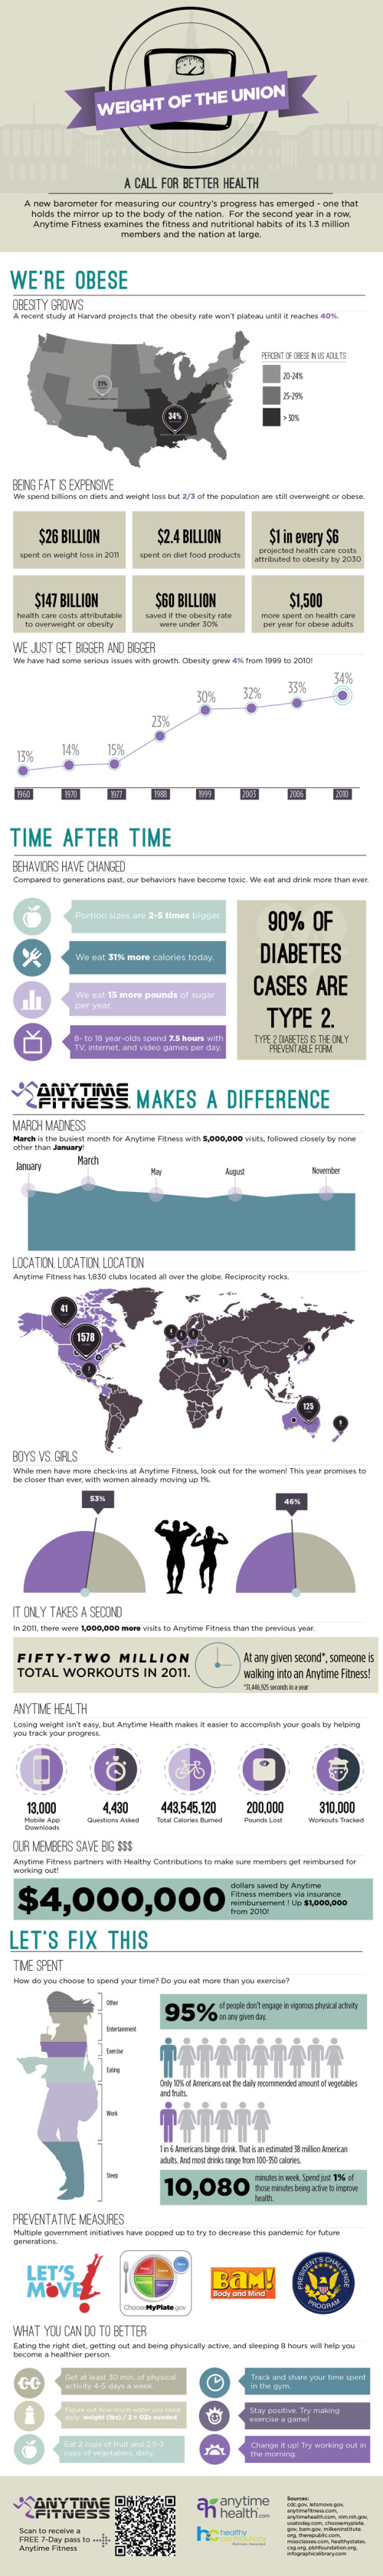 InfoGraphic on the Weight of the US,